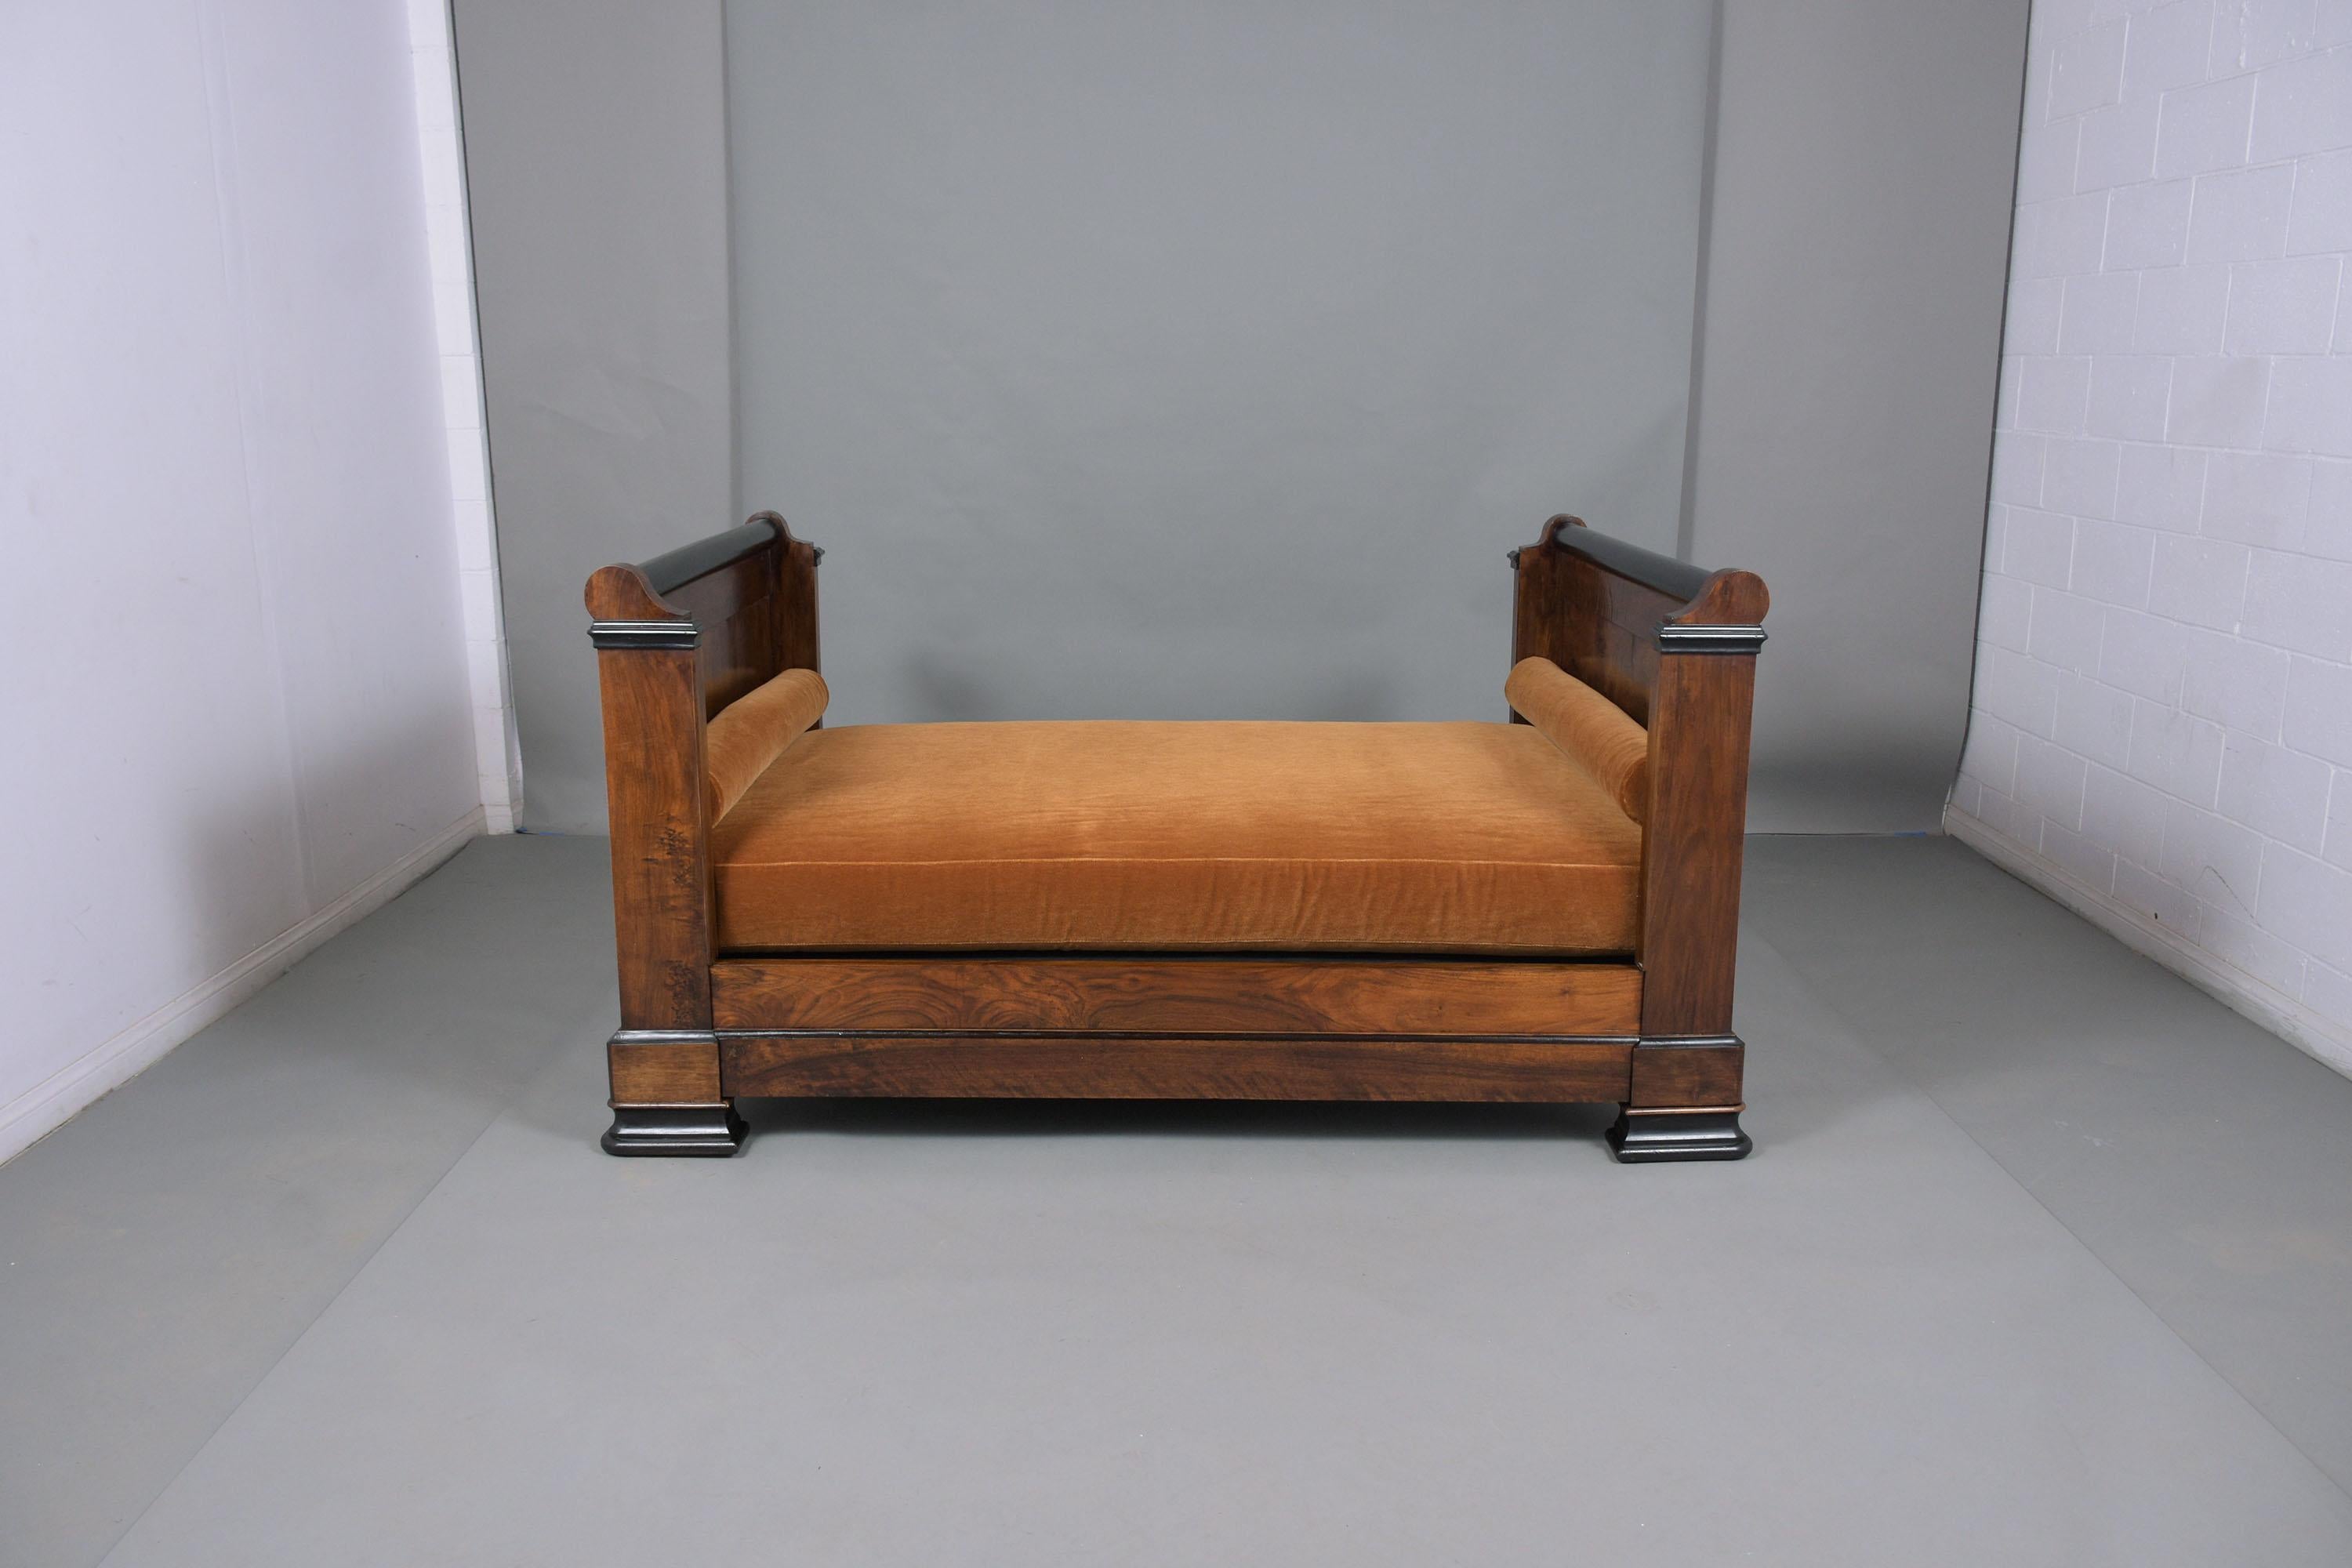 An extraordinary late 19th-century Empire daybed handcrafted out of walnut wood and been professionally restored by our craftsmen team in-house. This elegant daybed features a straight headboard, and molding details the bed is stained with a walnut